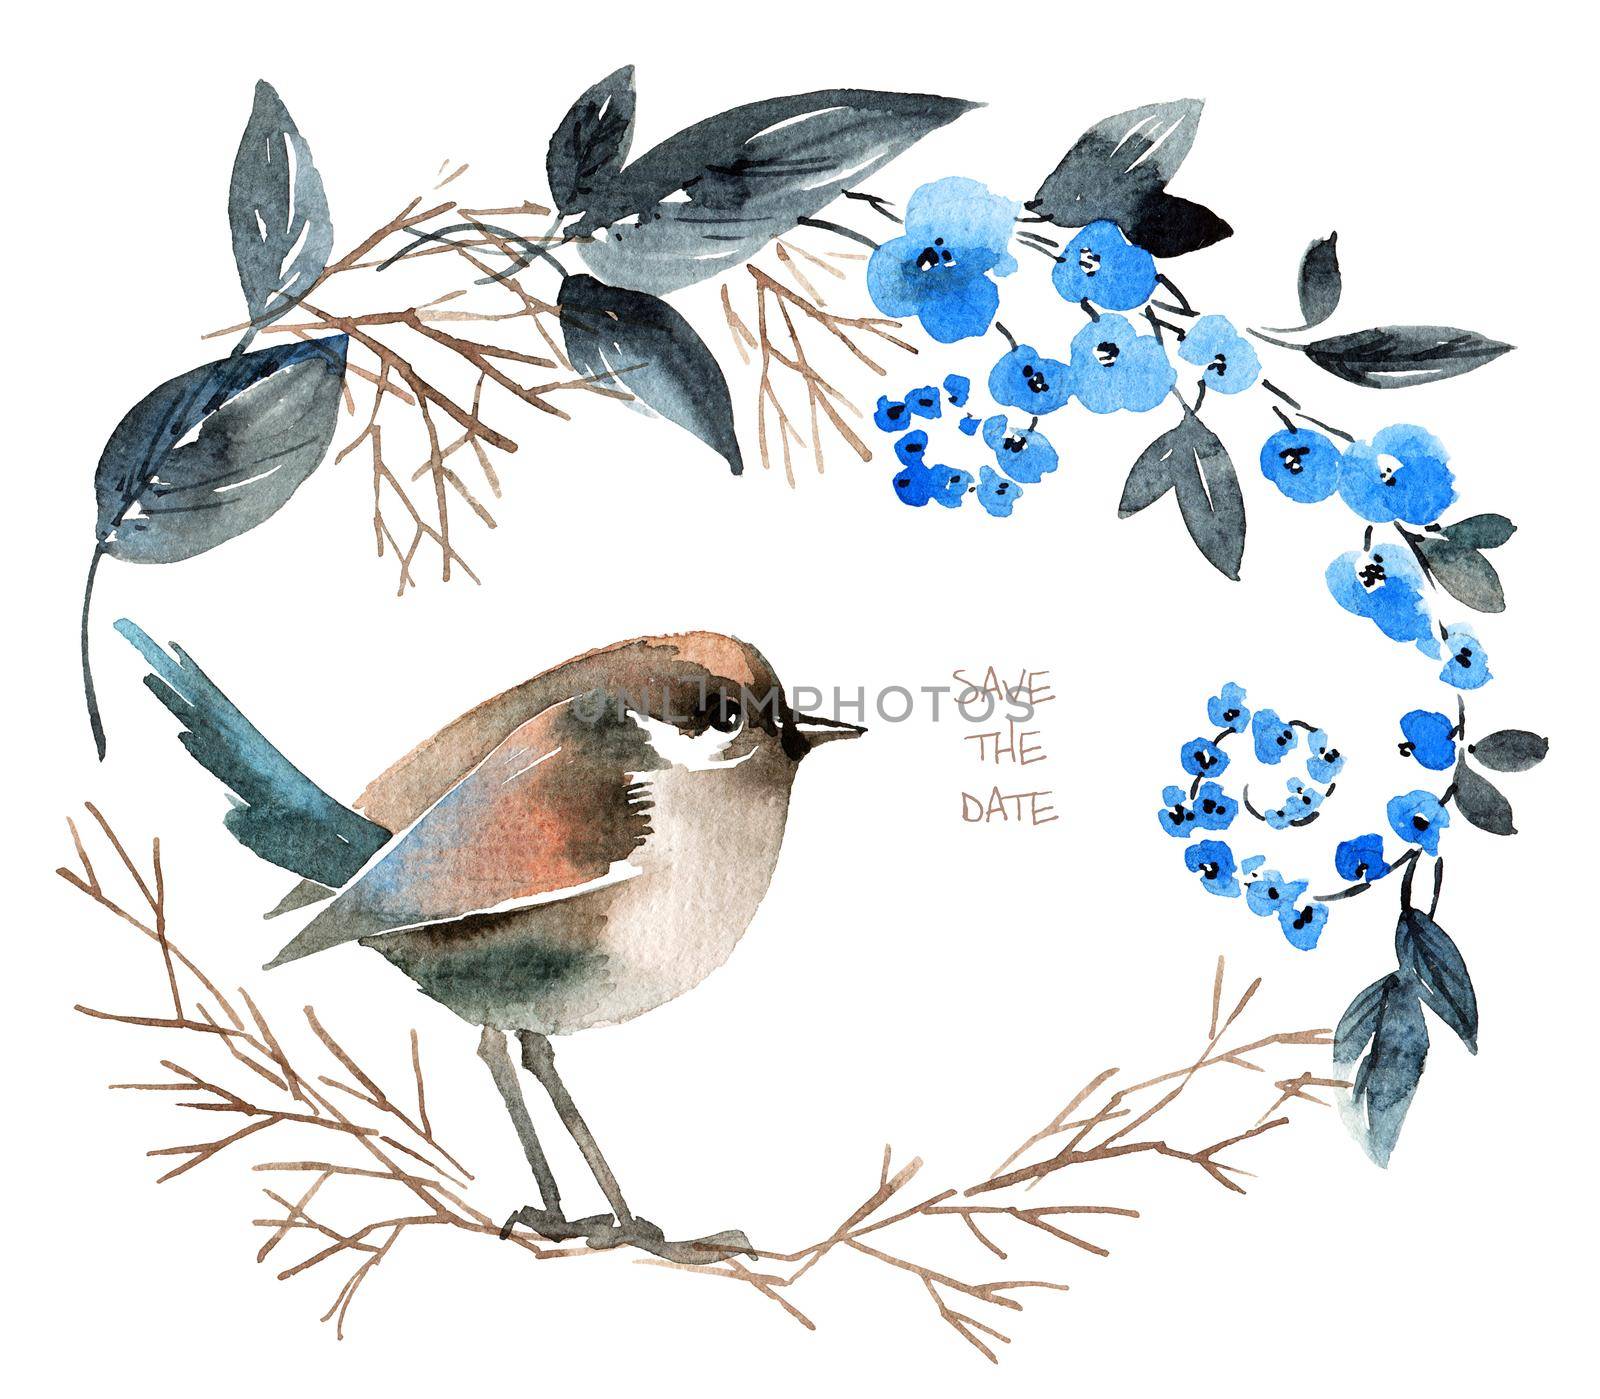 Watercolor illustration of bird on floral wreath. Design for greeting card, invitation or cover. Hand-drawn bird, blue flowers, stems and leaves.